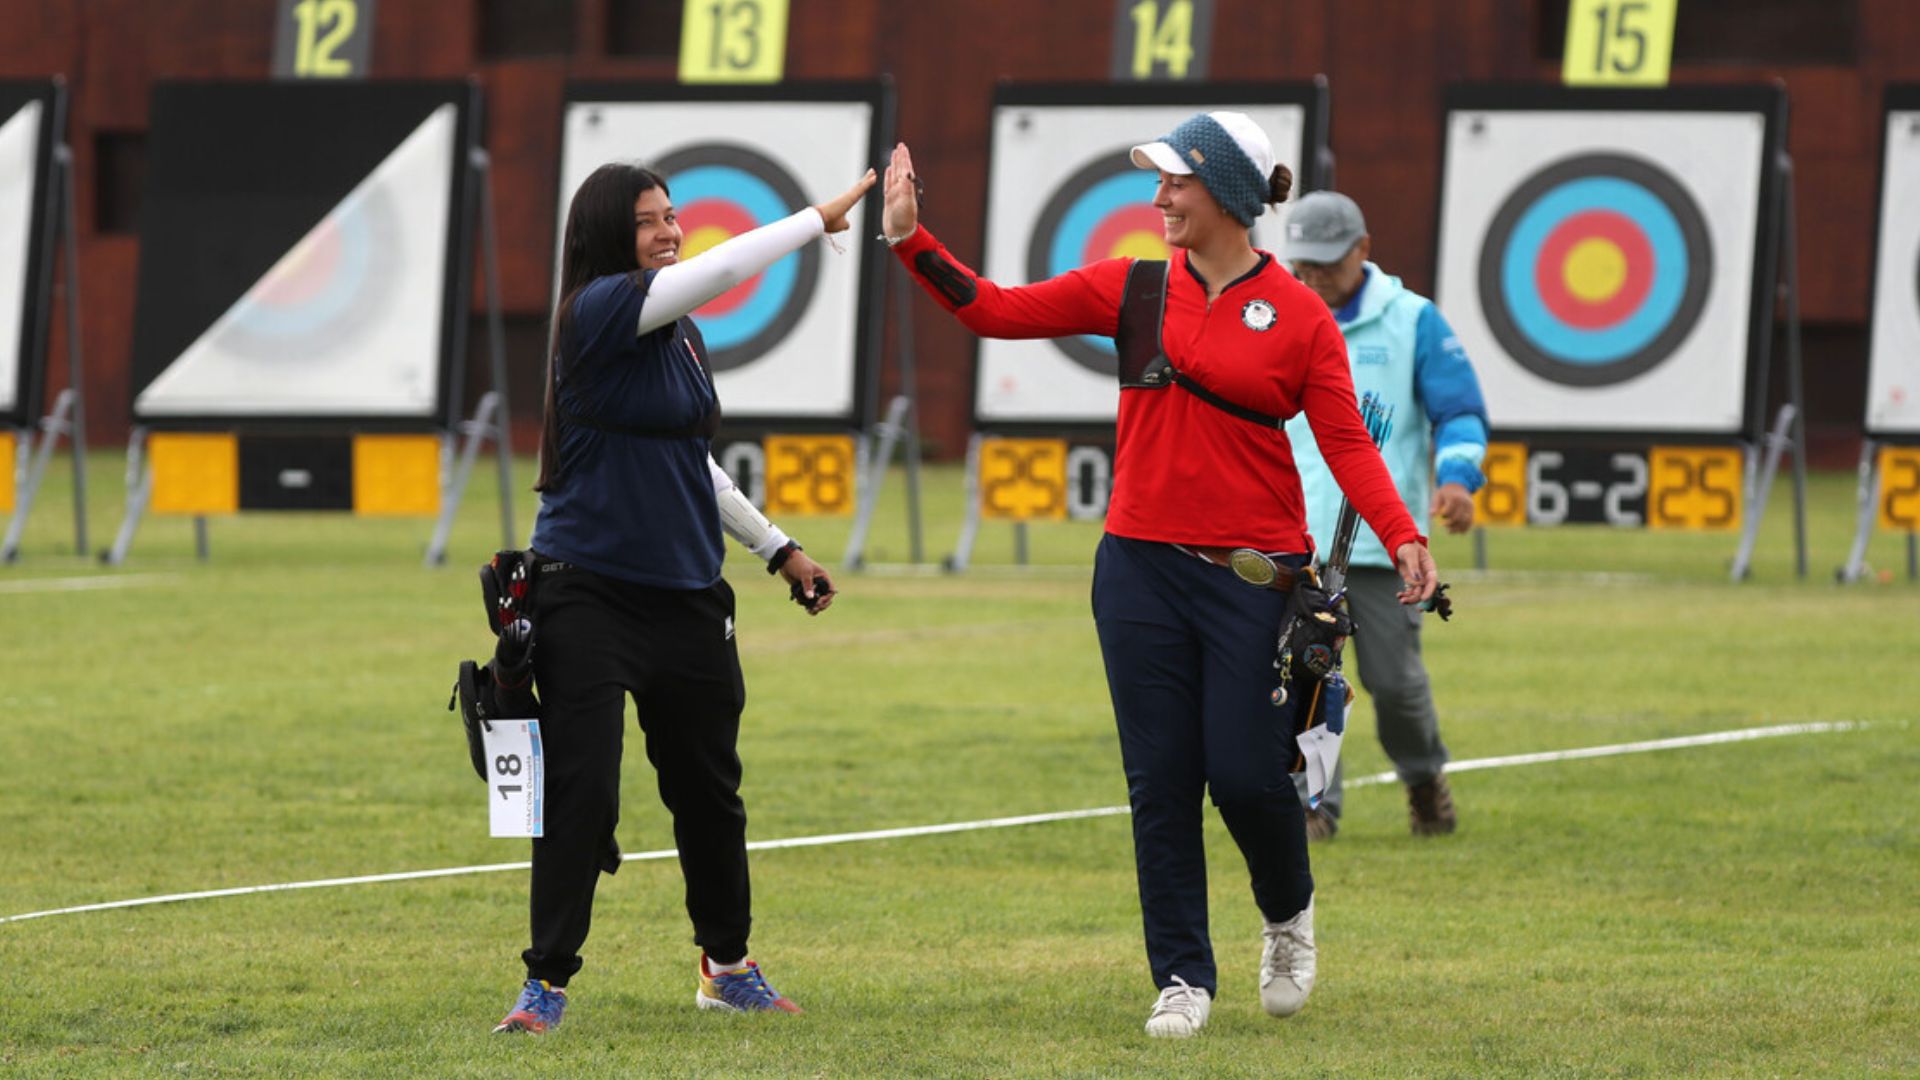 The United States Secures Two Gold Medals Against Mexico in Recurve Archery